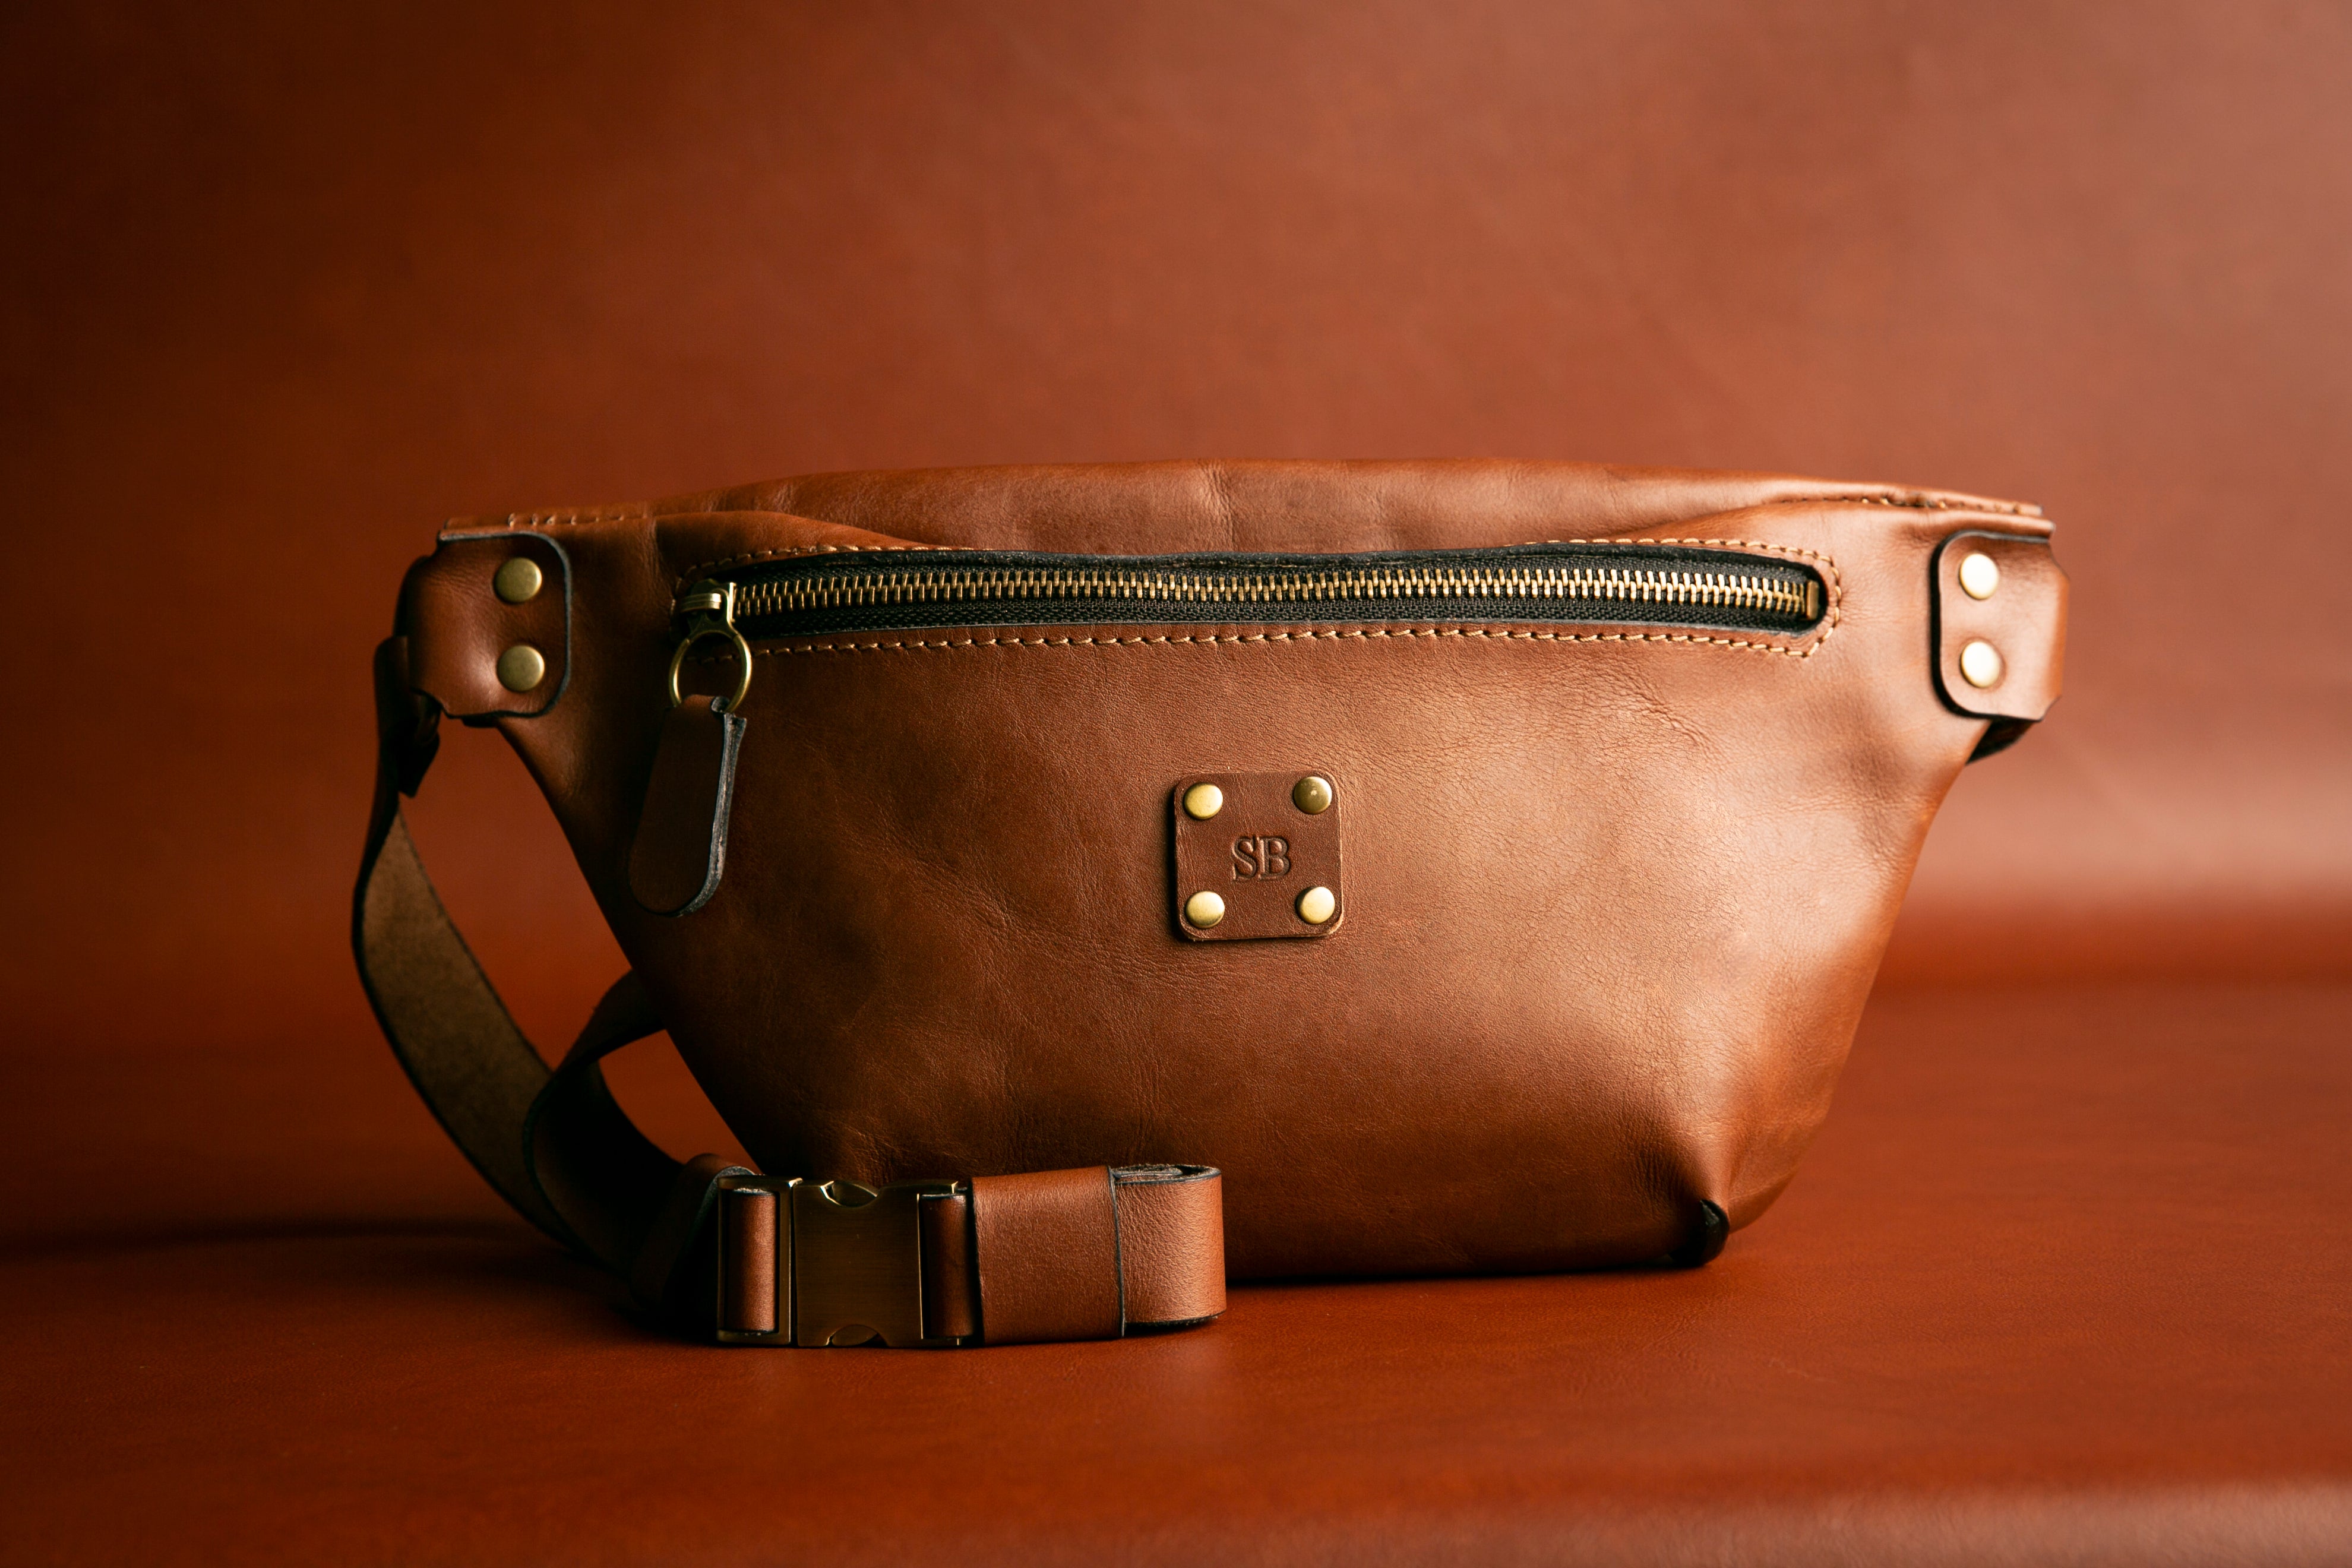 No.105 Leather Fanny Pack, Bum Bag with adjustable strap.